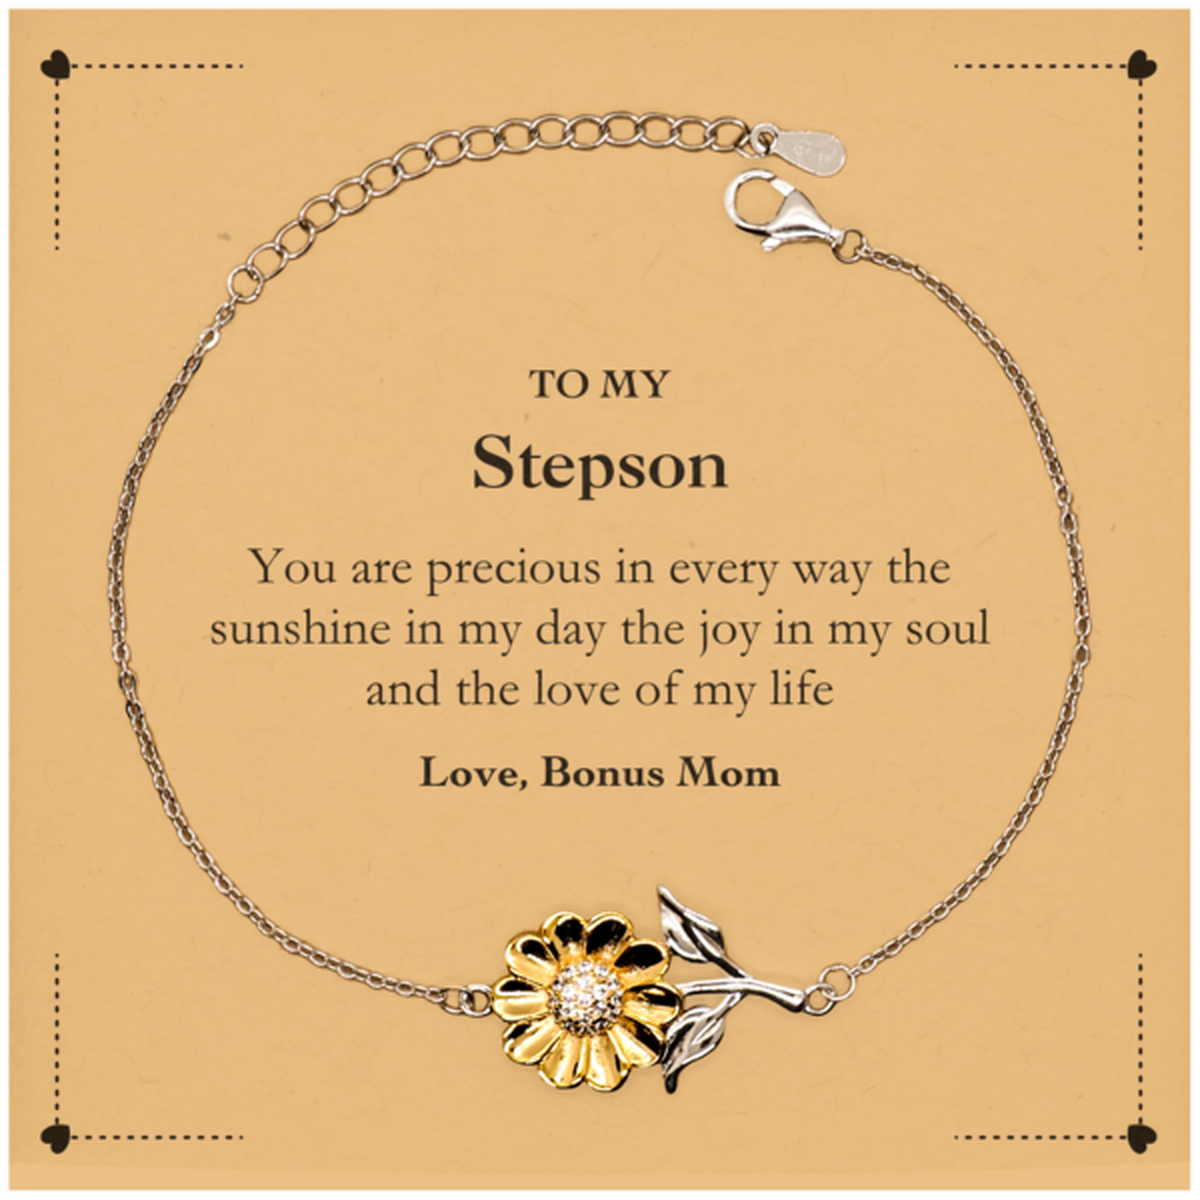 Graduation Gifts for Stepson Sunflower Bracelet Present from Bonus Mom, Christmas Stepson Birthday Gifts Stepson You are precious in every way the sunshine in my day. Love, Bonus Mom